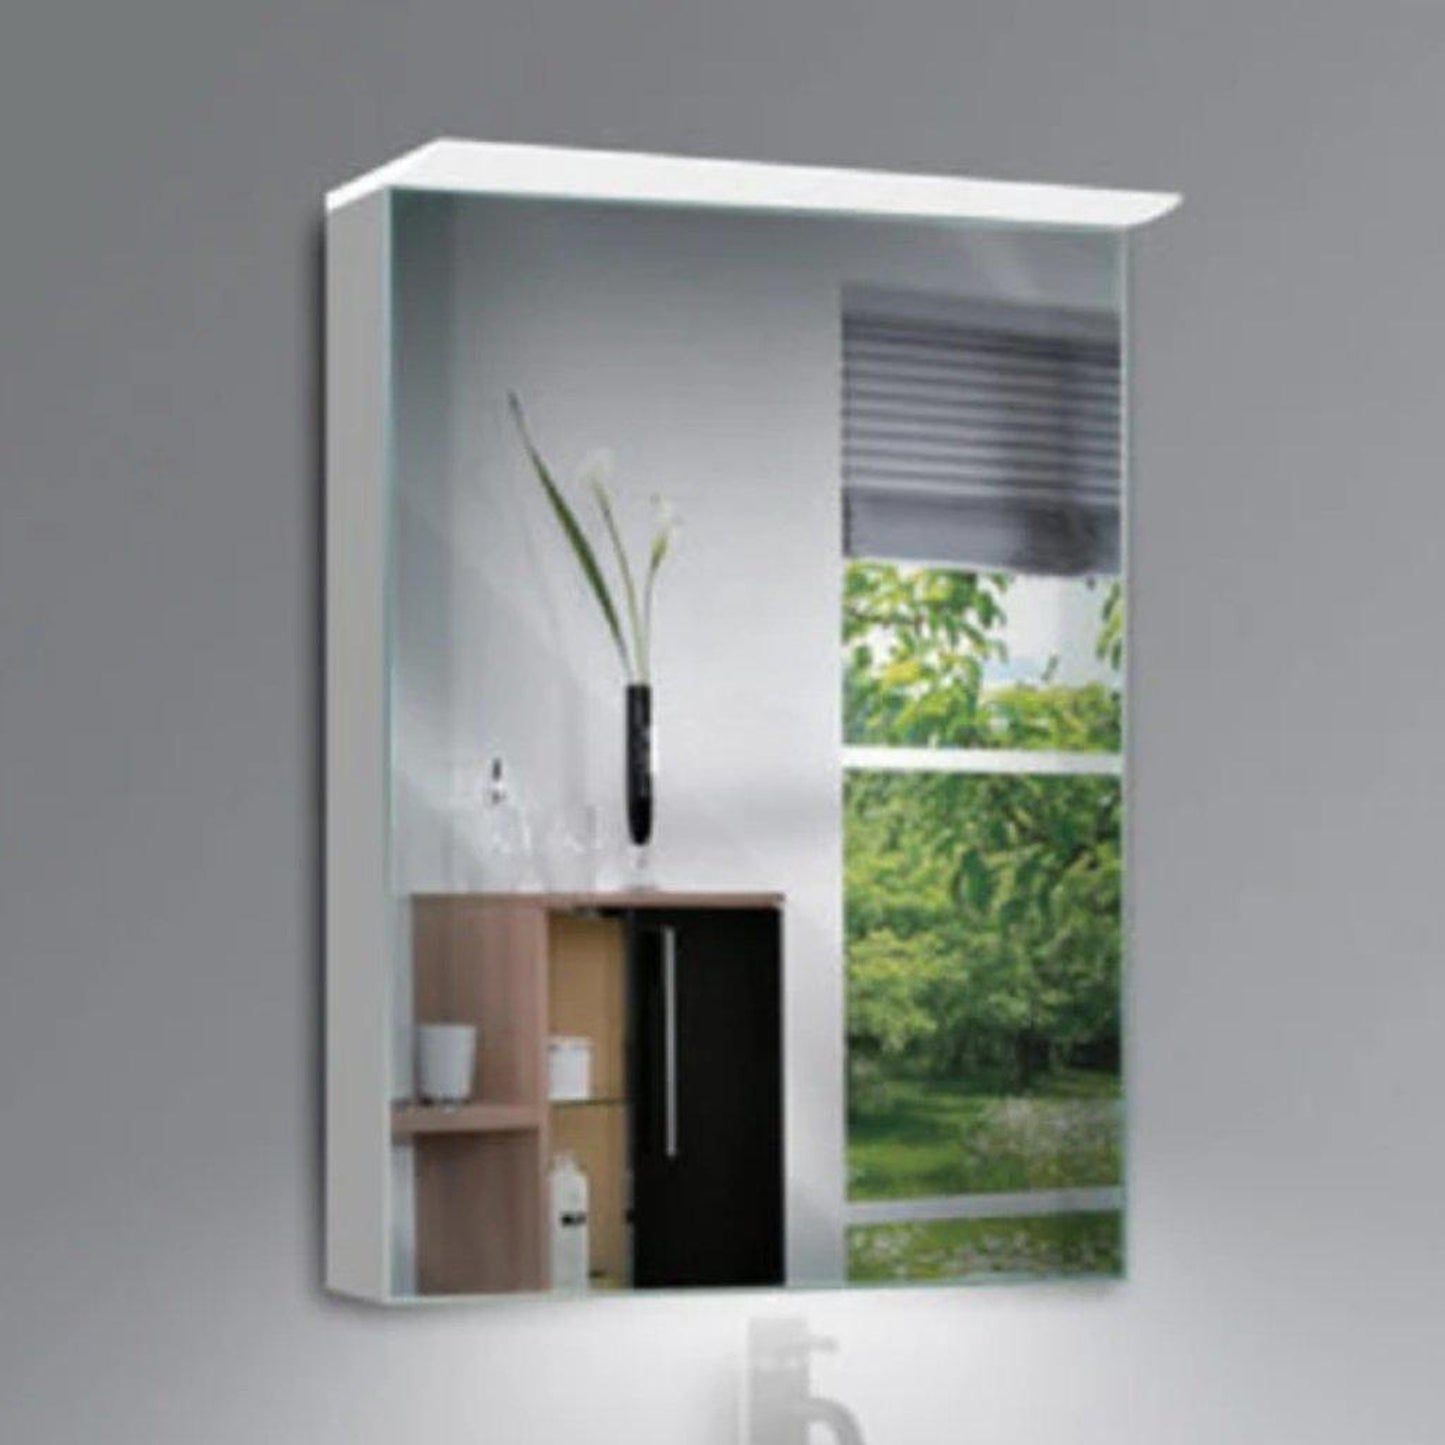 Lighted Impressions Paseo 20" x 28" Rectangular Framed Wall-Mounted LED Mirror Cabinet With IR Sensor & Glass Shelves